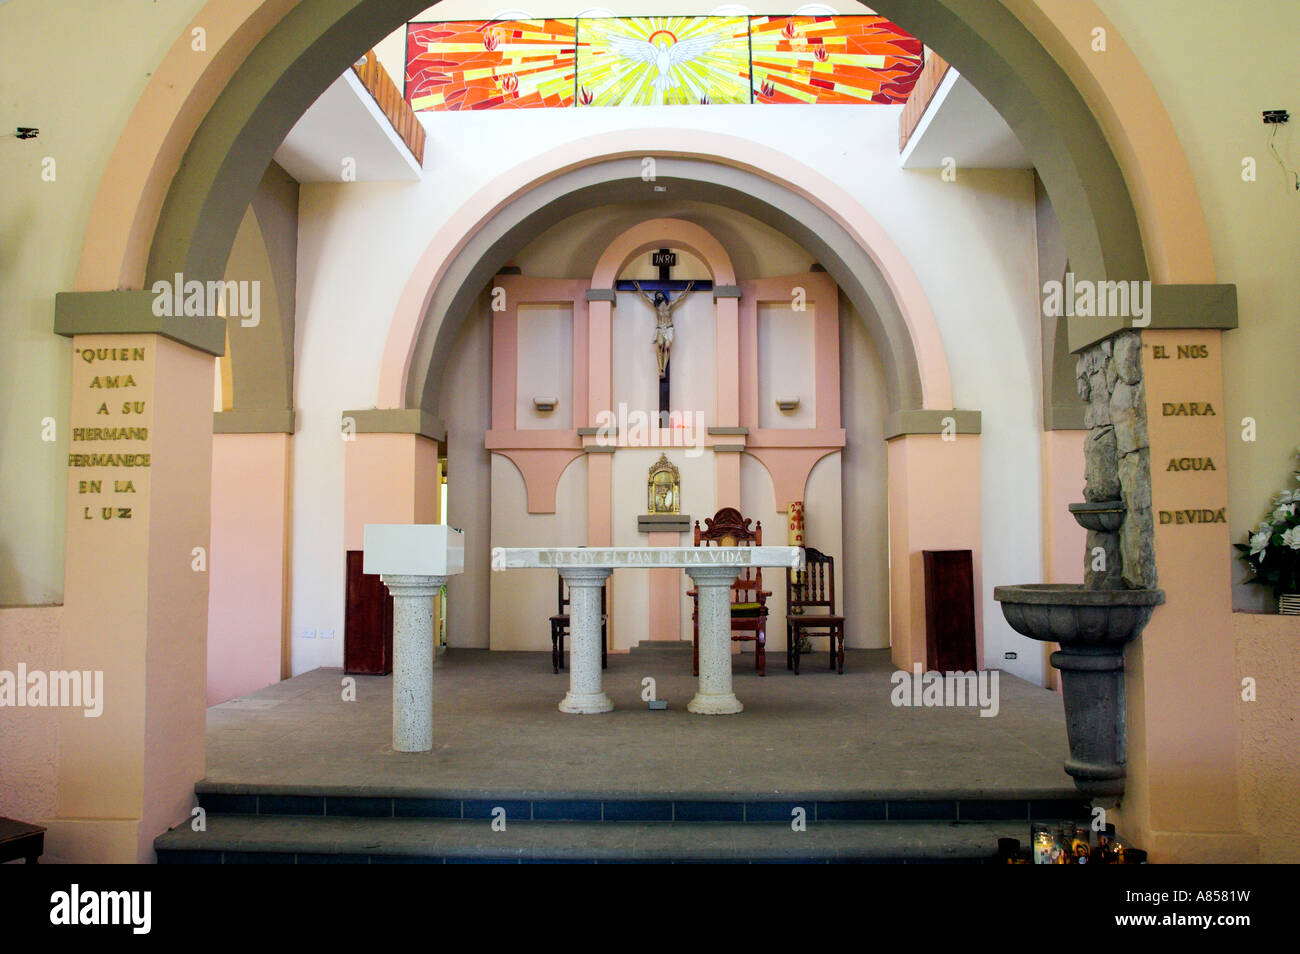 The interior sanctuary of the church of Cabo San Lucas Iglesia de San Lucas in Cabo San Lucas Mexico Stock Photo